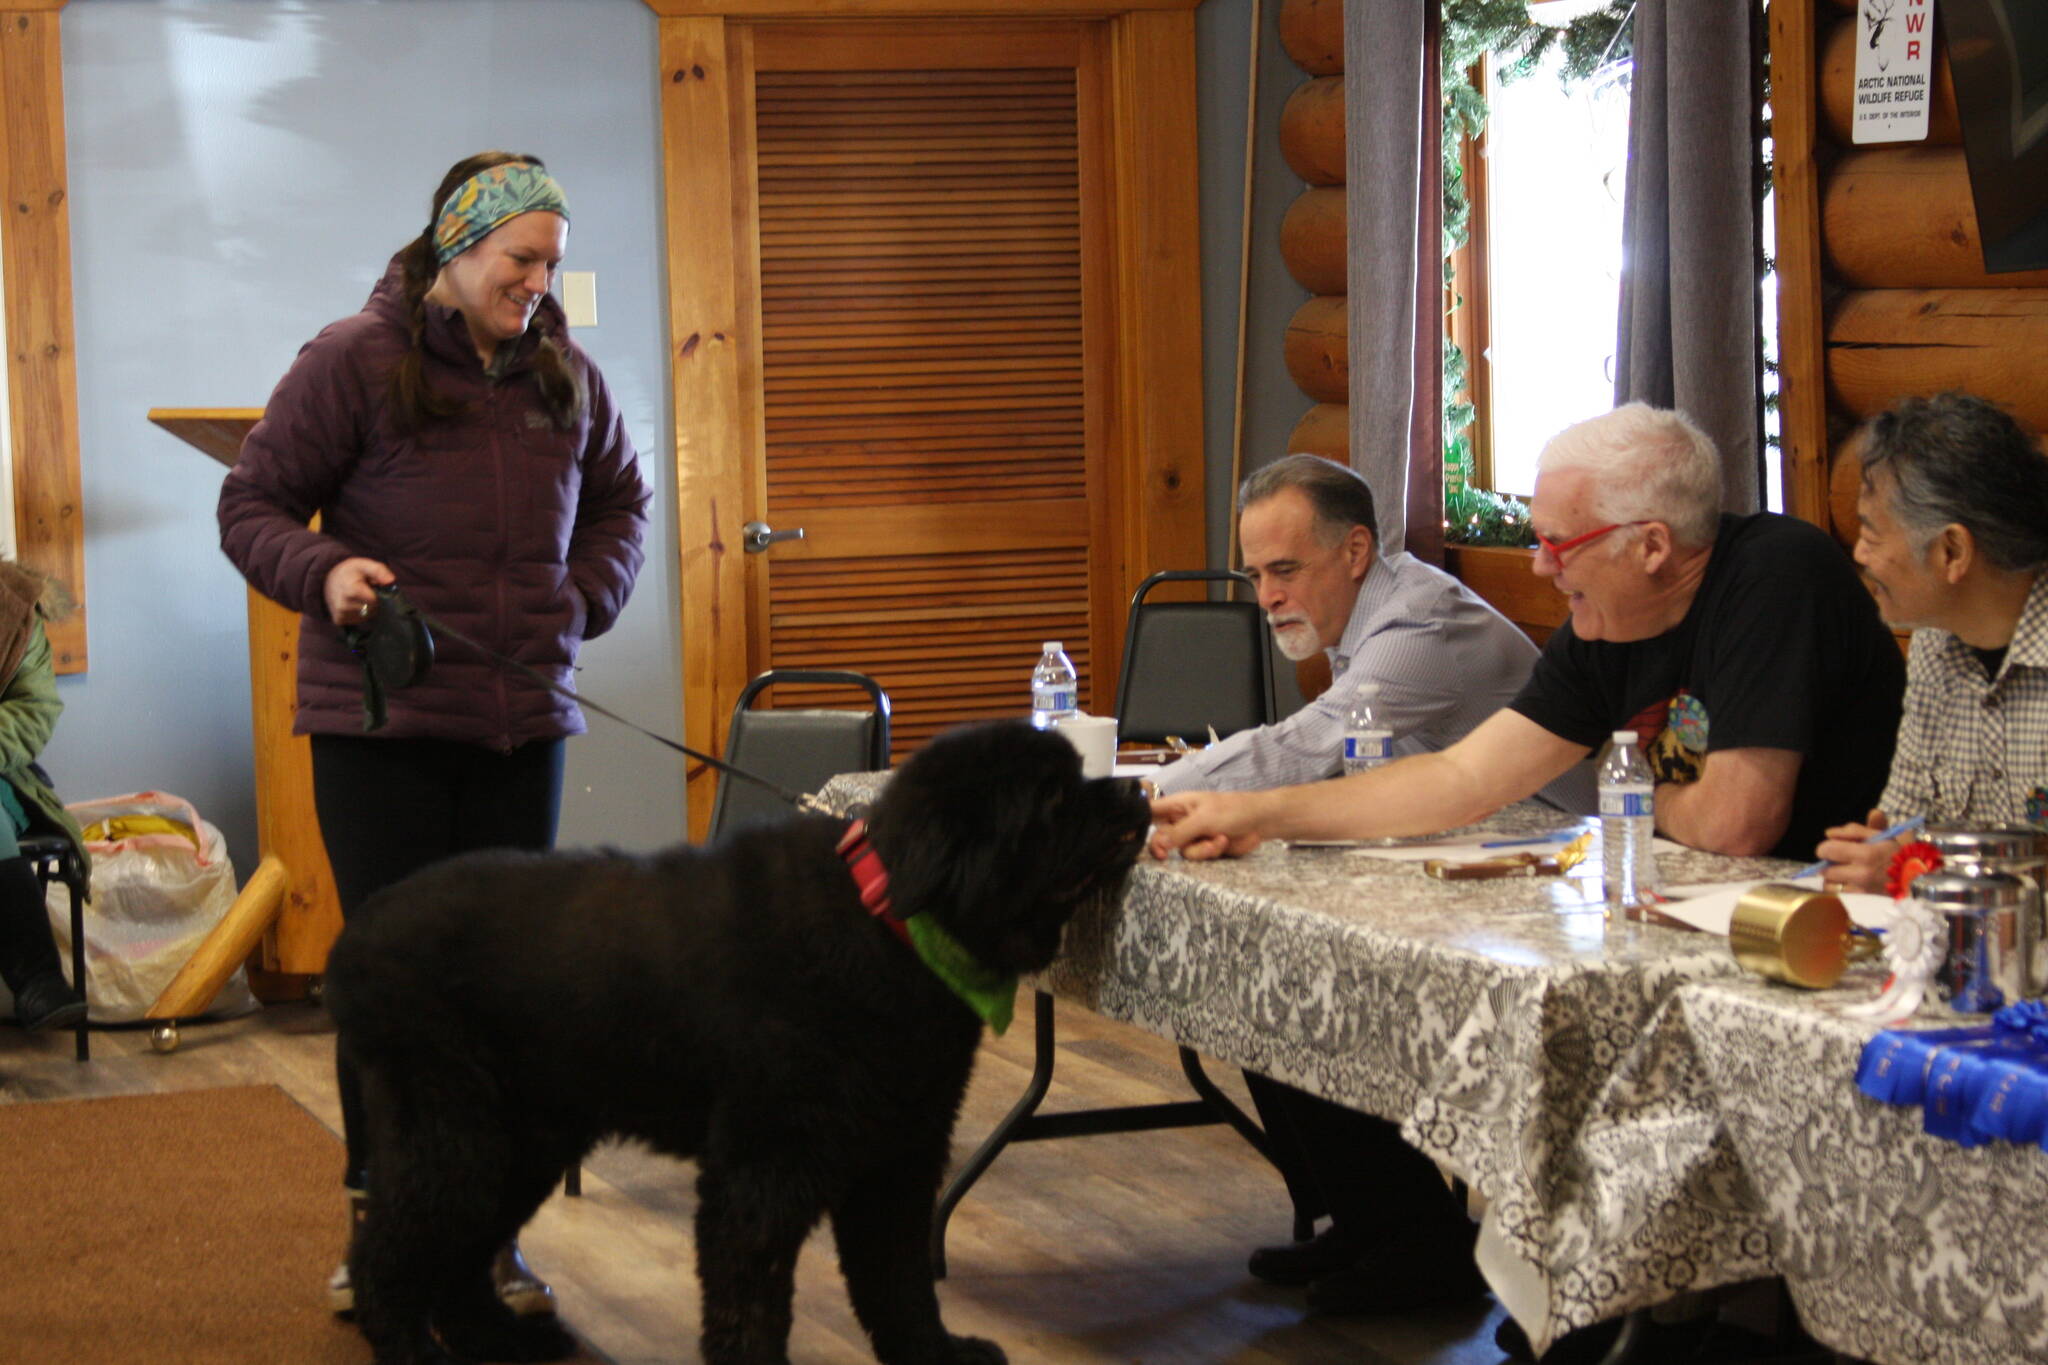 “Biggest dog” award winner, Newfoundland Hickory, greets the judges’ table with his owner, Katie Newsted during the Snow Rondi dog show on Sunday, March 5 at the Anchor Point Senior Center in Anchor Point, Alaska. Photo by Delcenia Cosman